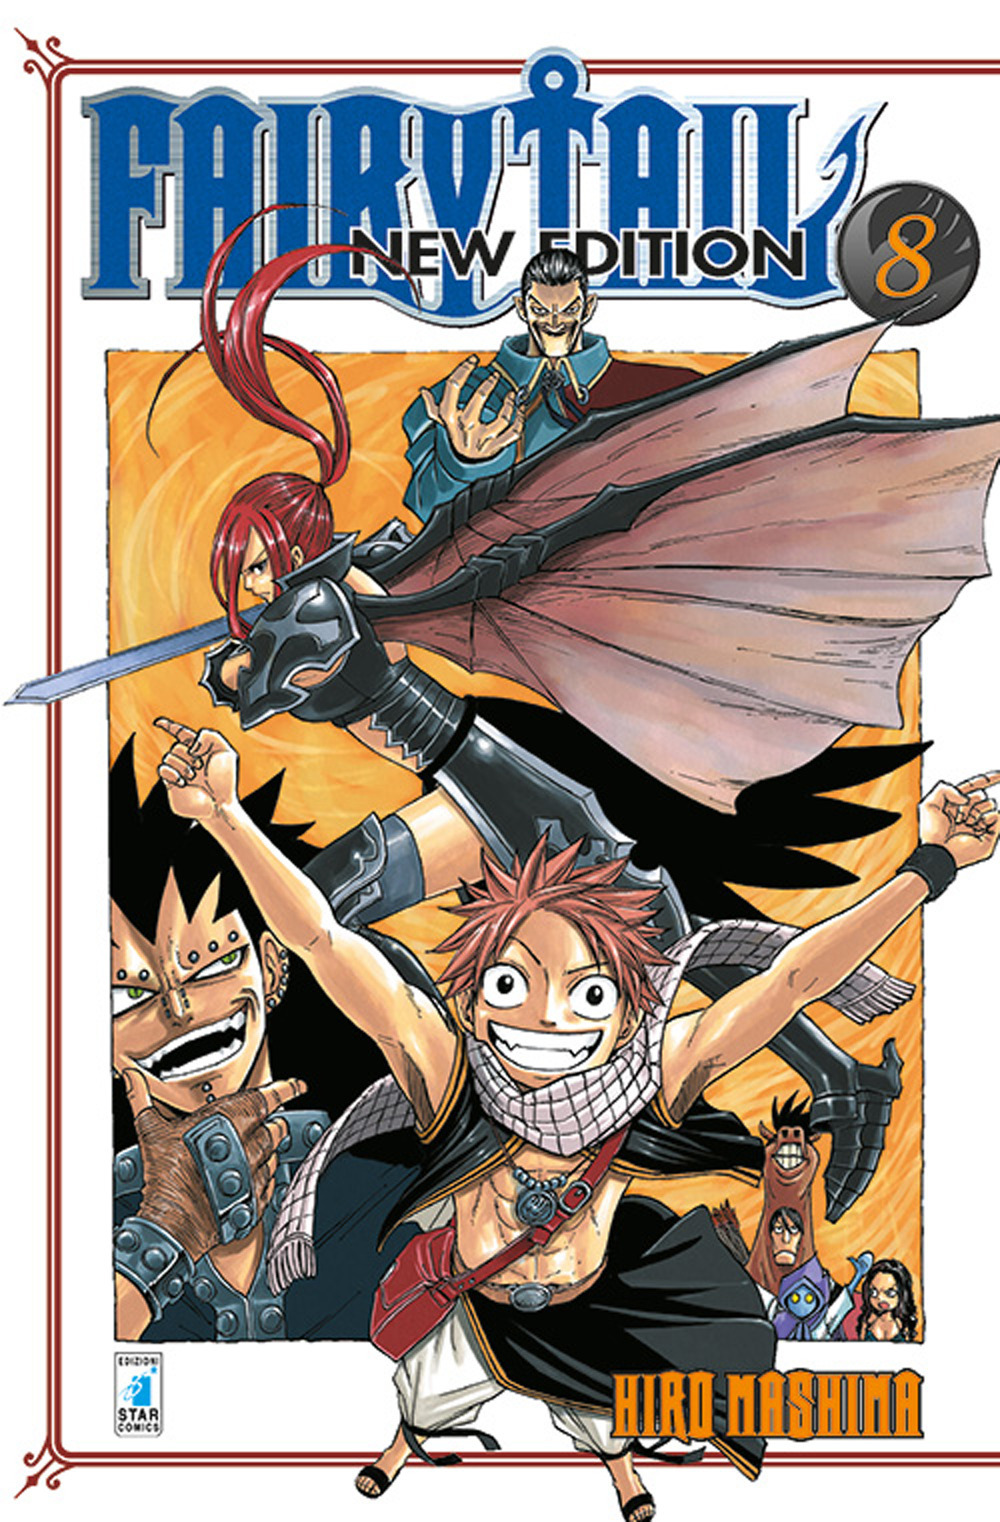 FAIRY TAIL NEW EDITION N. 8